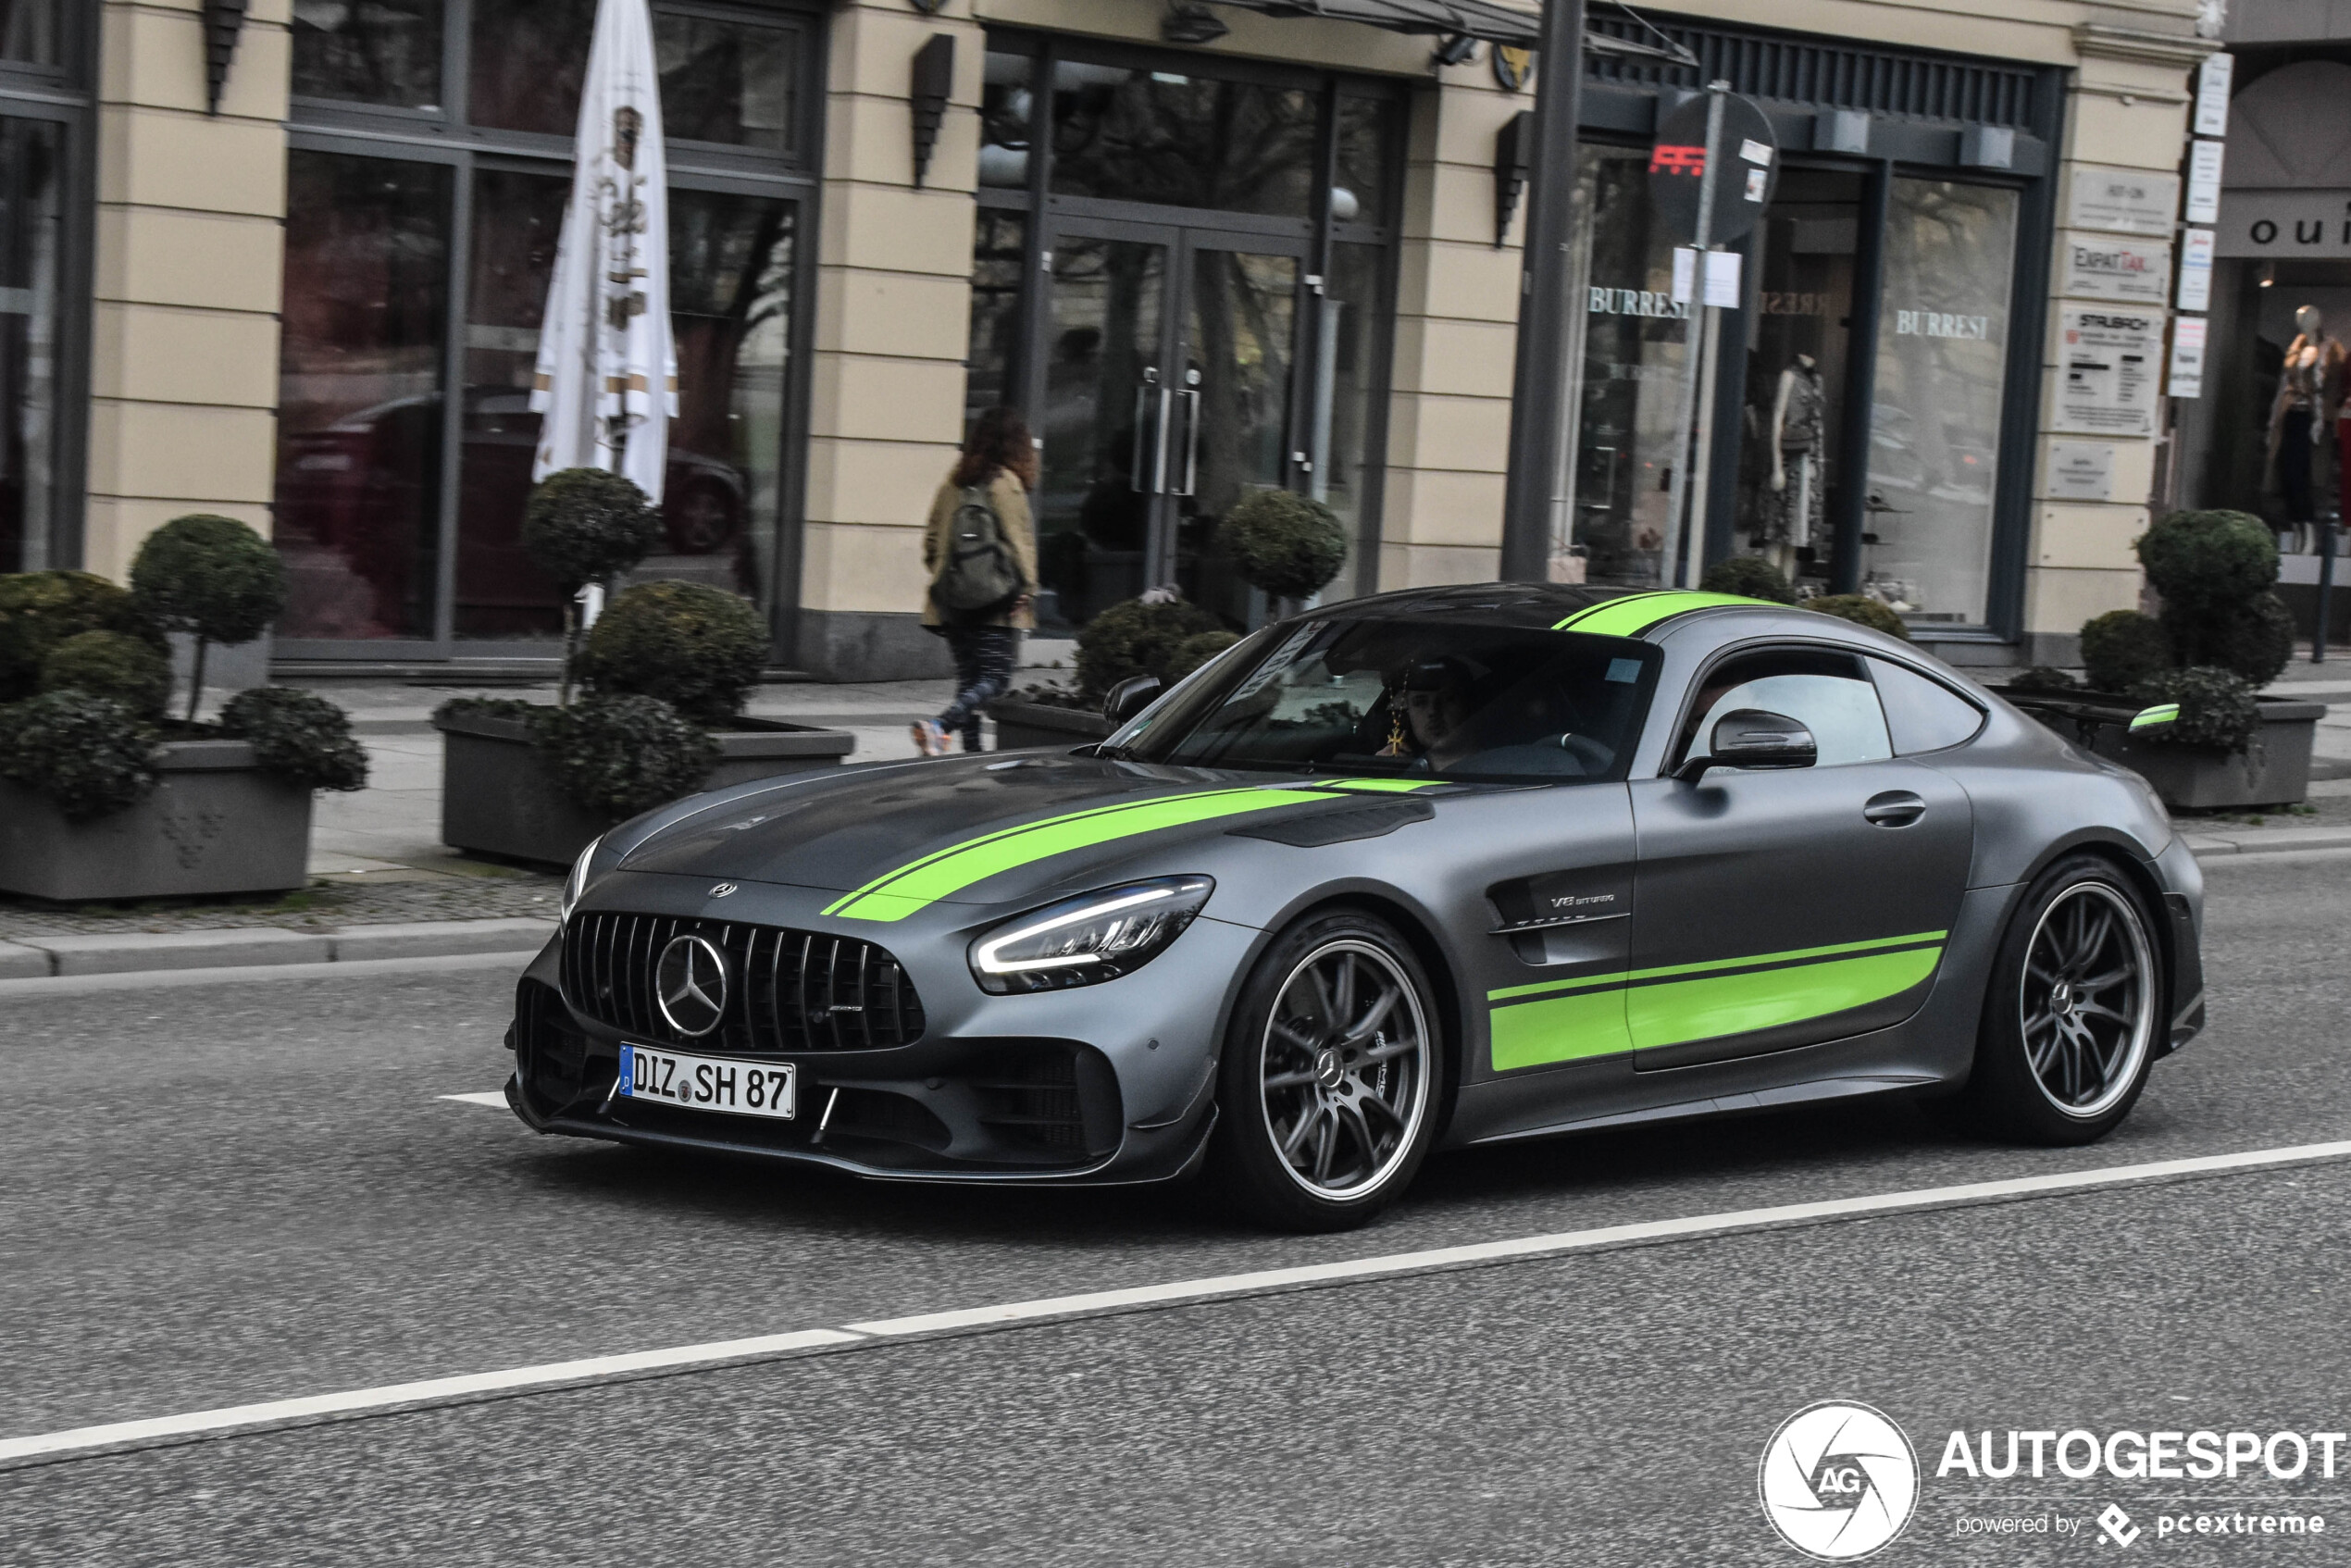 Mercedes-AMG GT R Pro conquers the streets of Wiesbaden Germany.